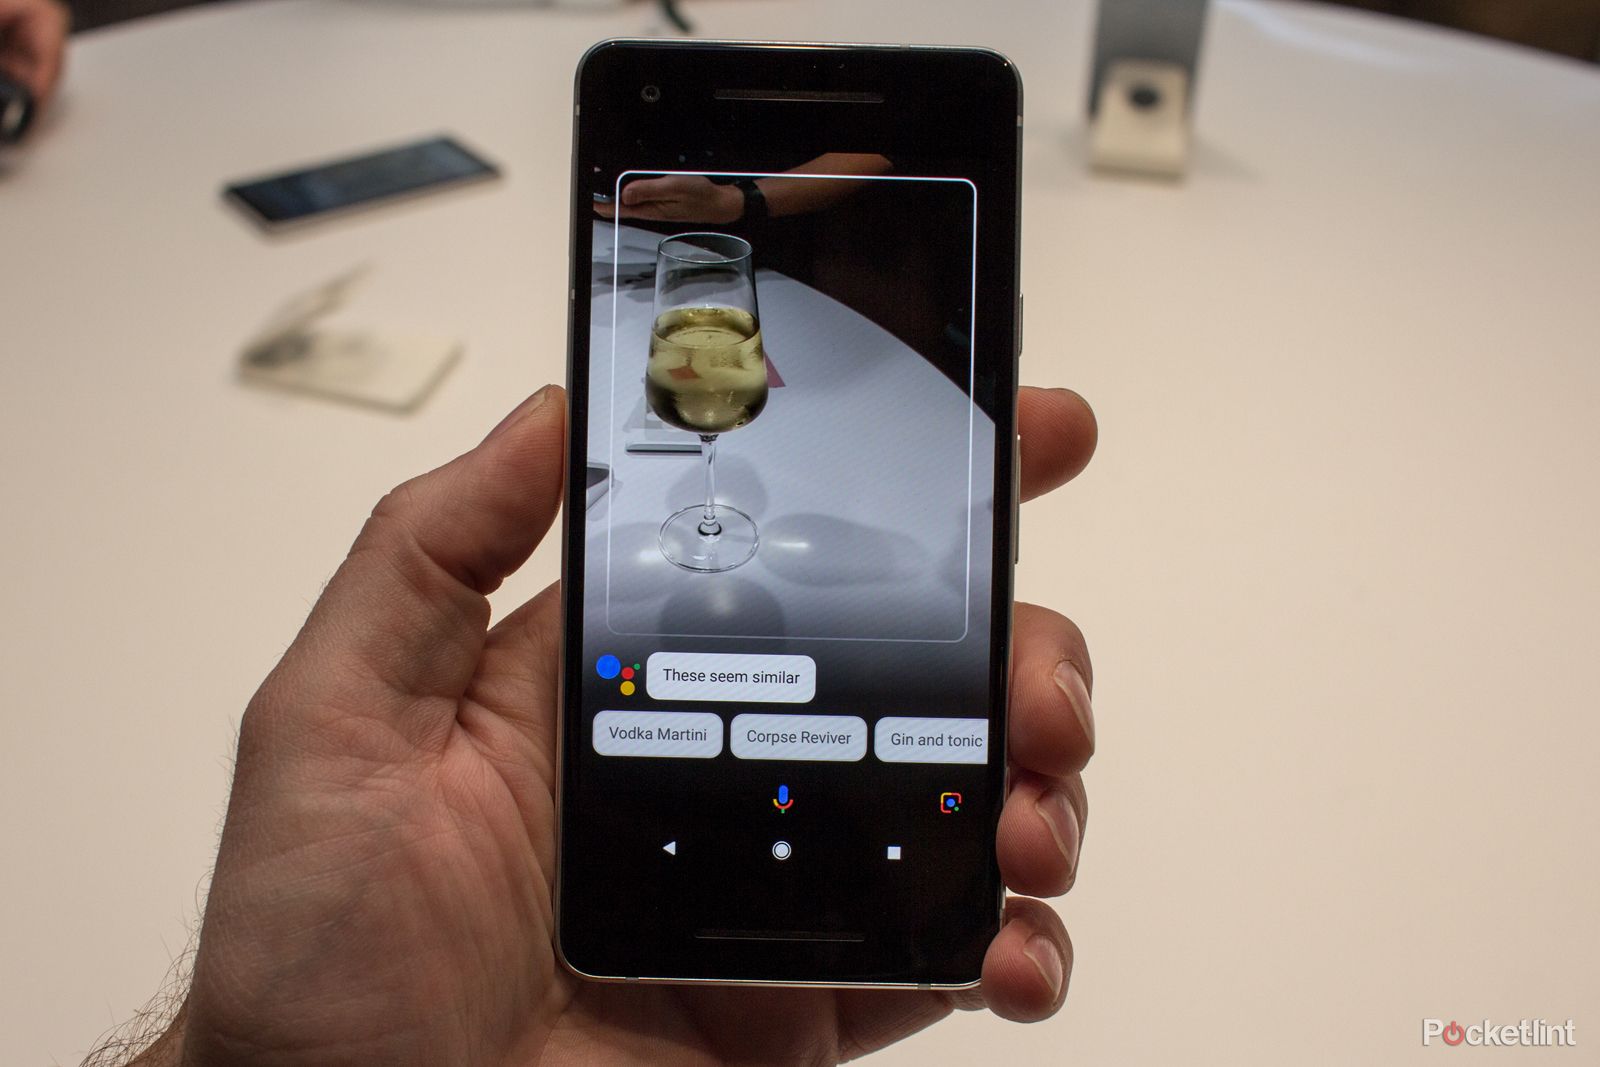 How do I know if my phone has Google Lens?